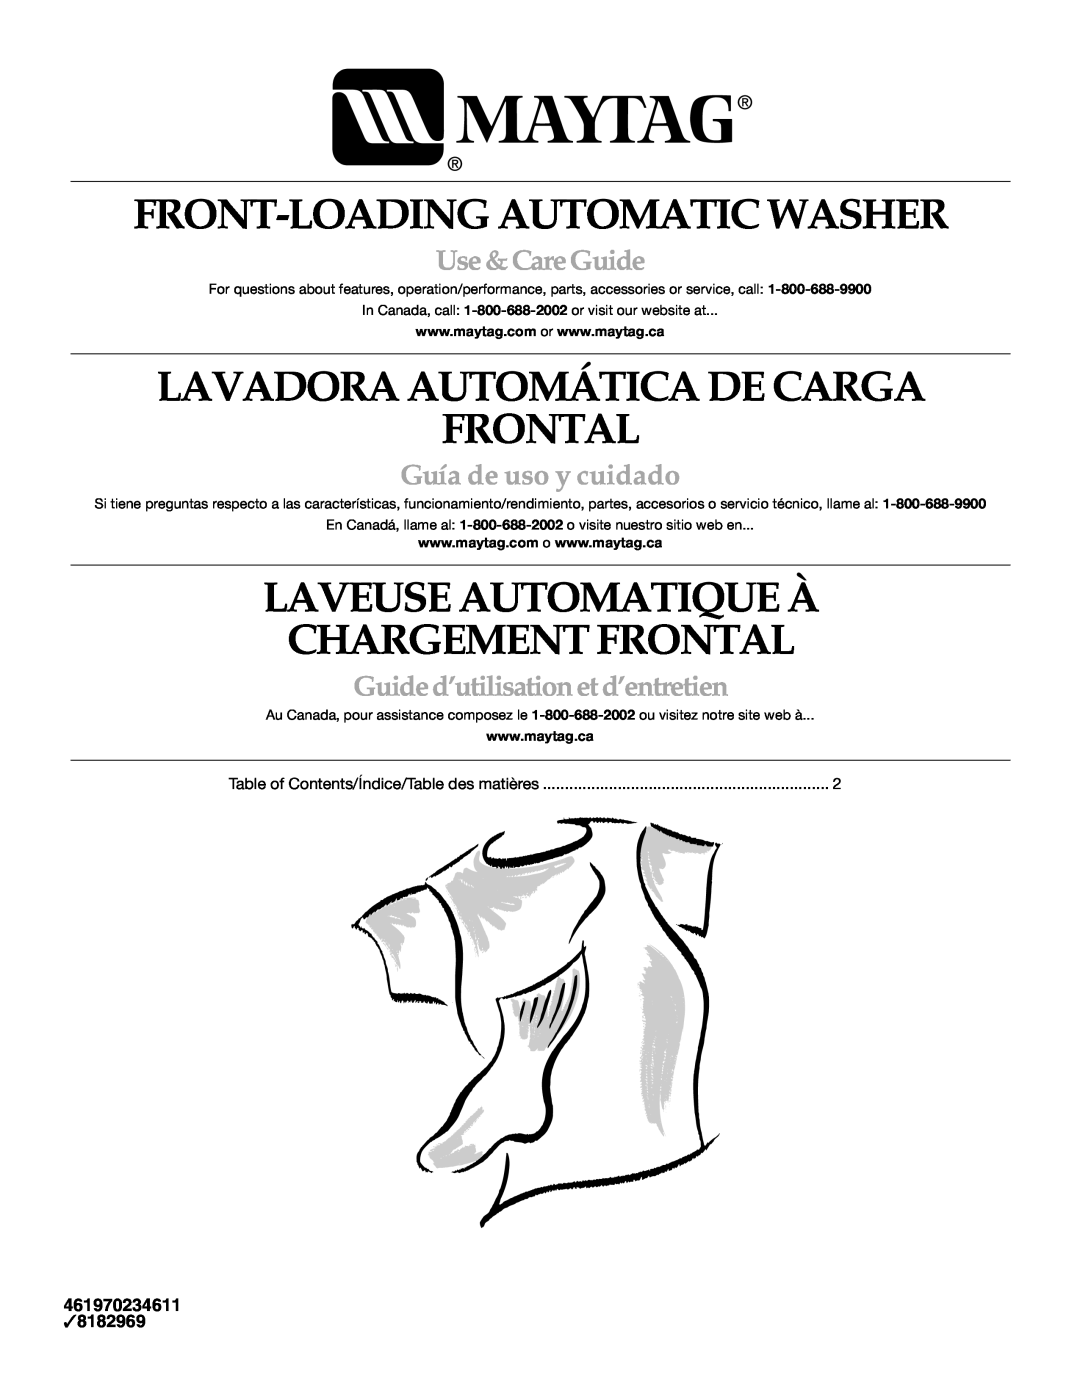 Maytag 8182969 manual Front-Loading Automatic Washer, Lavadora Automática De Carga Frontal, Use &CareGuide, 461970234611 